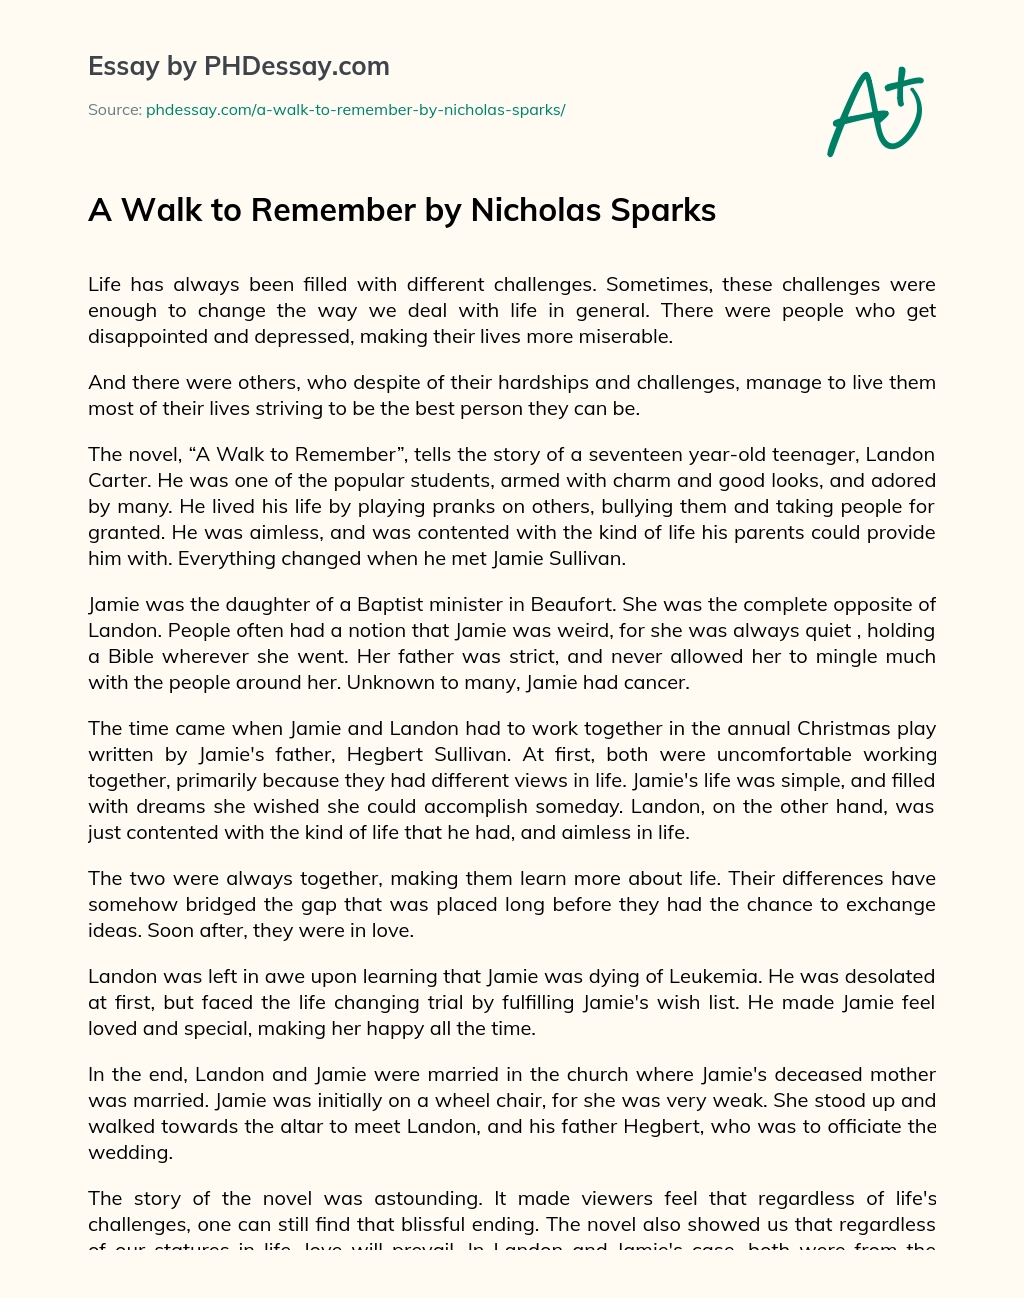 A Walk to Remember by Nicholas Sparks essay